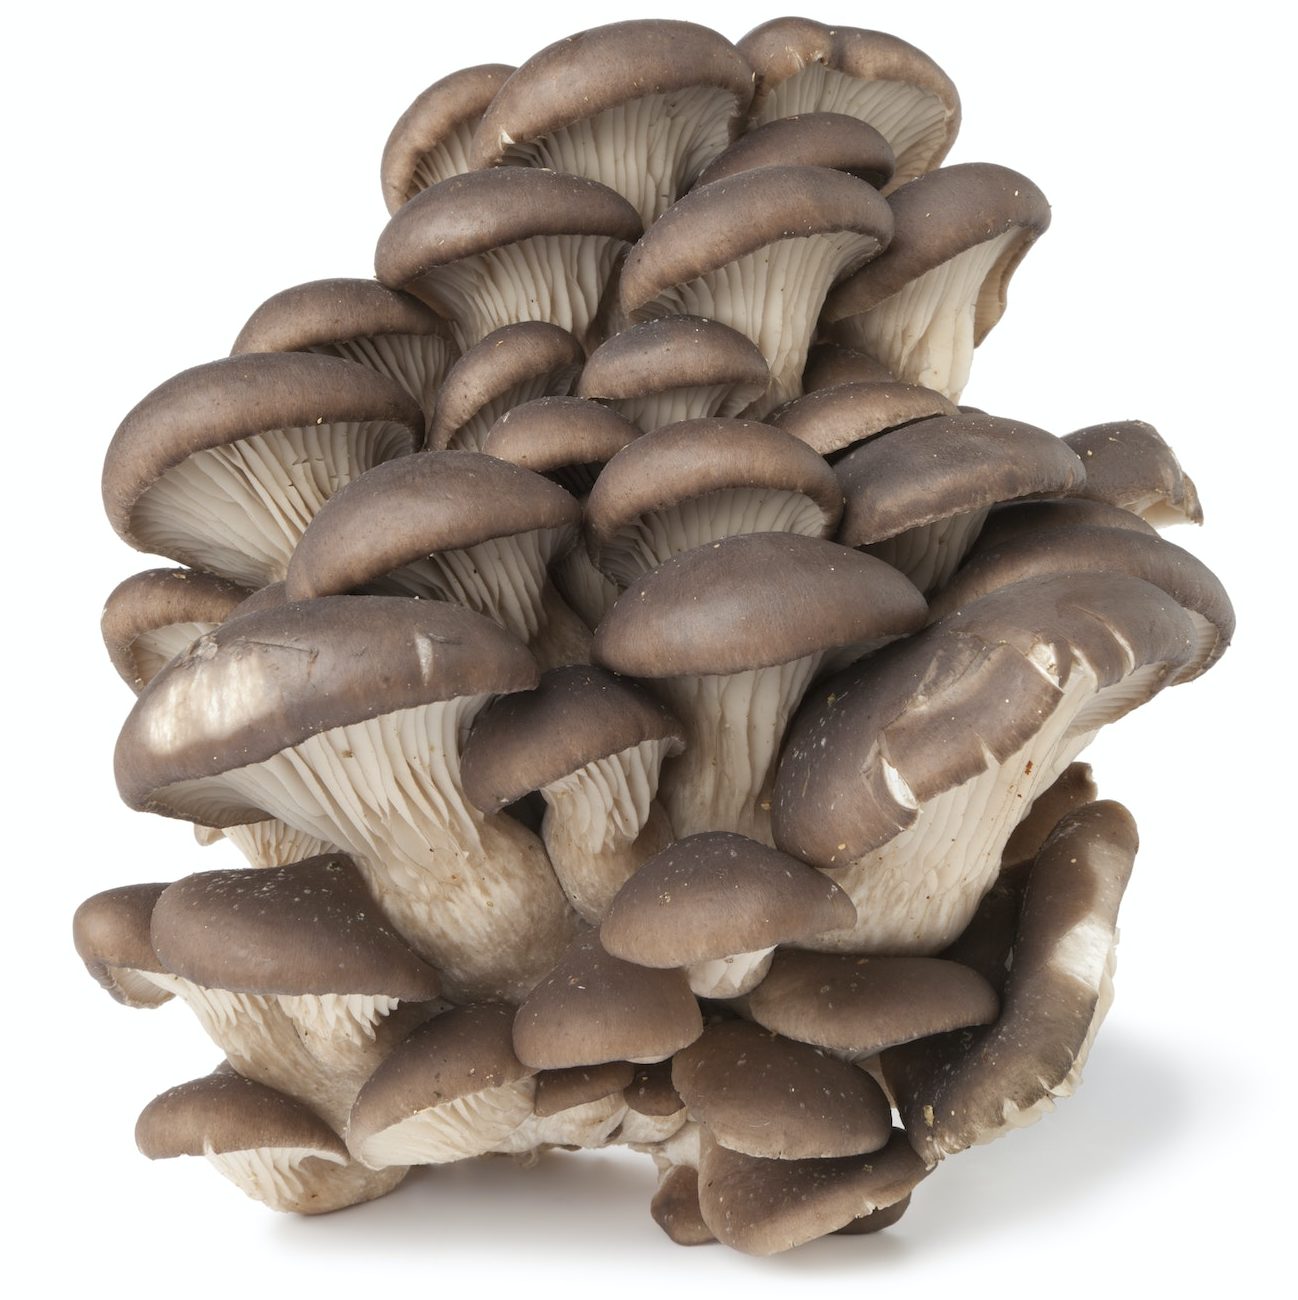 Group of Common oyster mushrooms